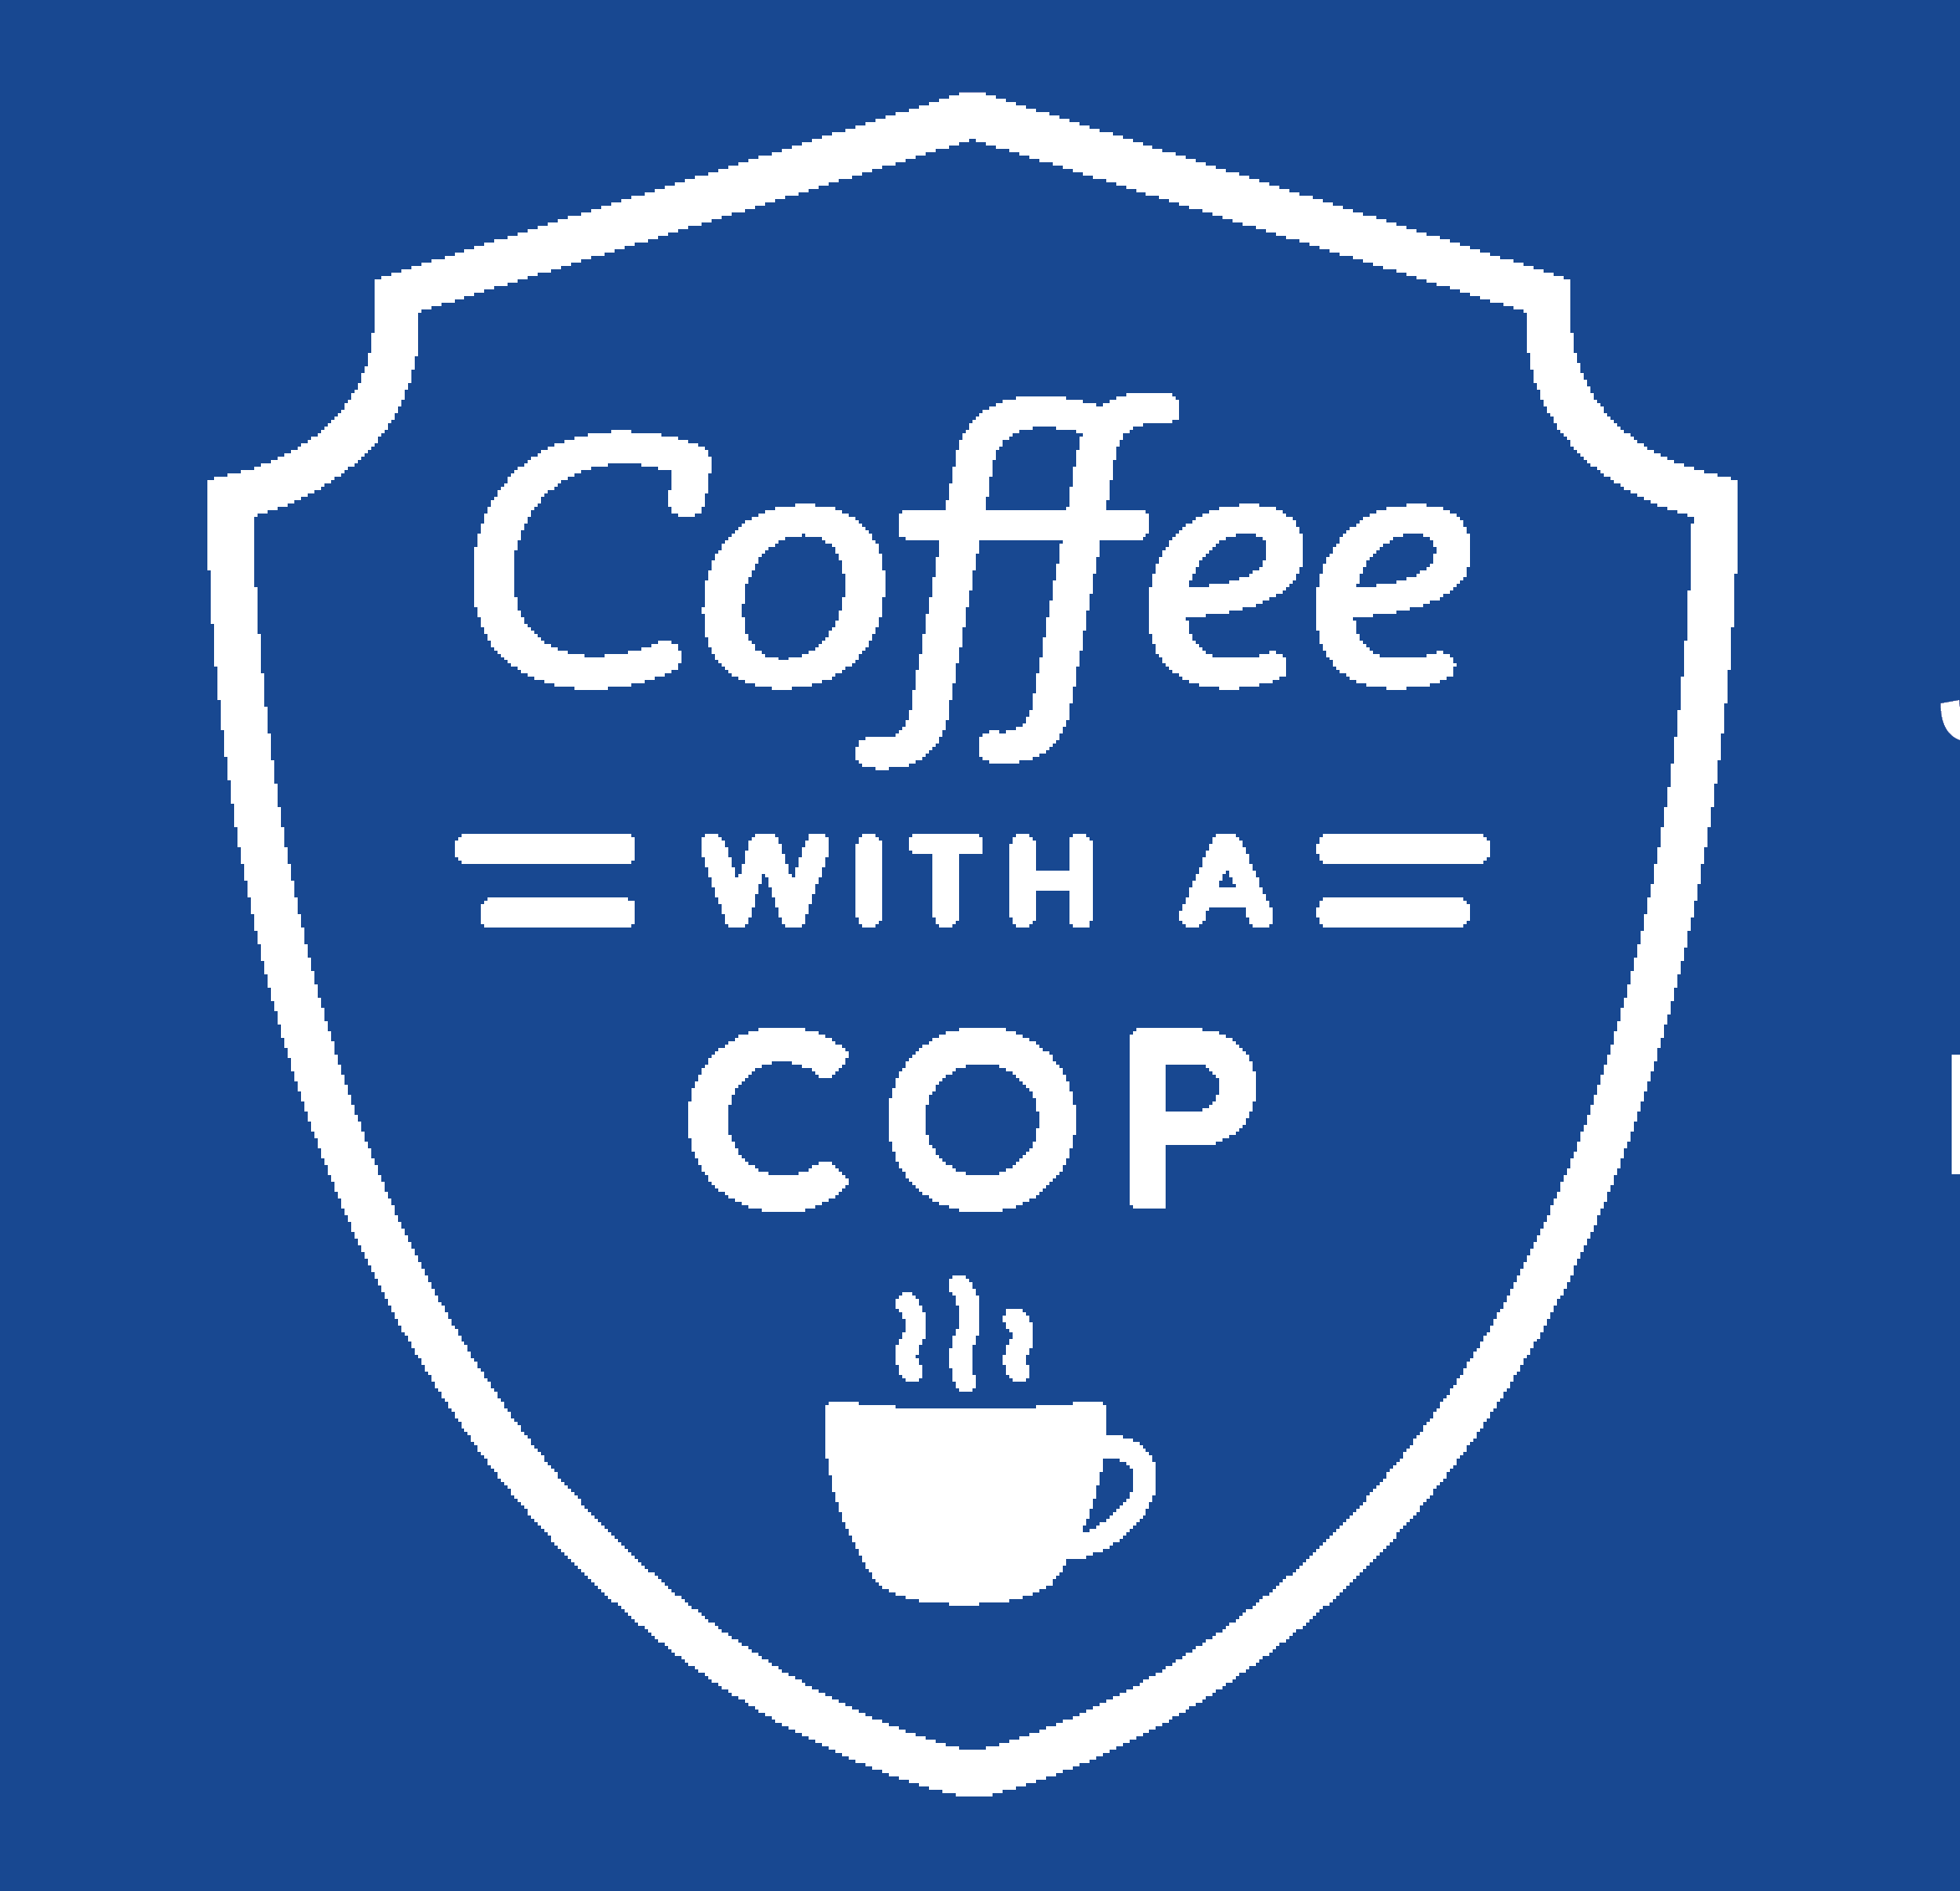 Coffee with a cop poster 2019 - Copy